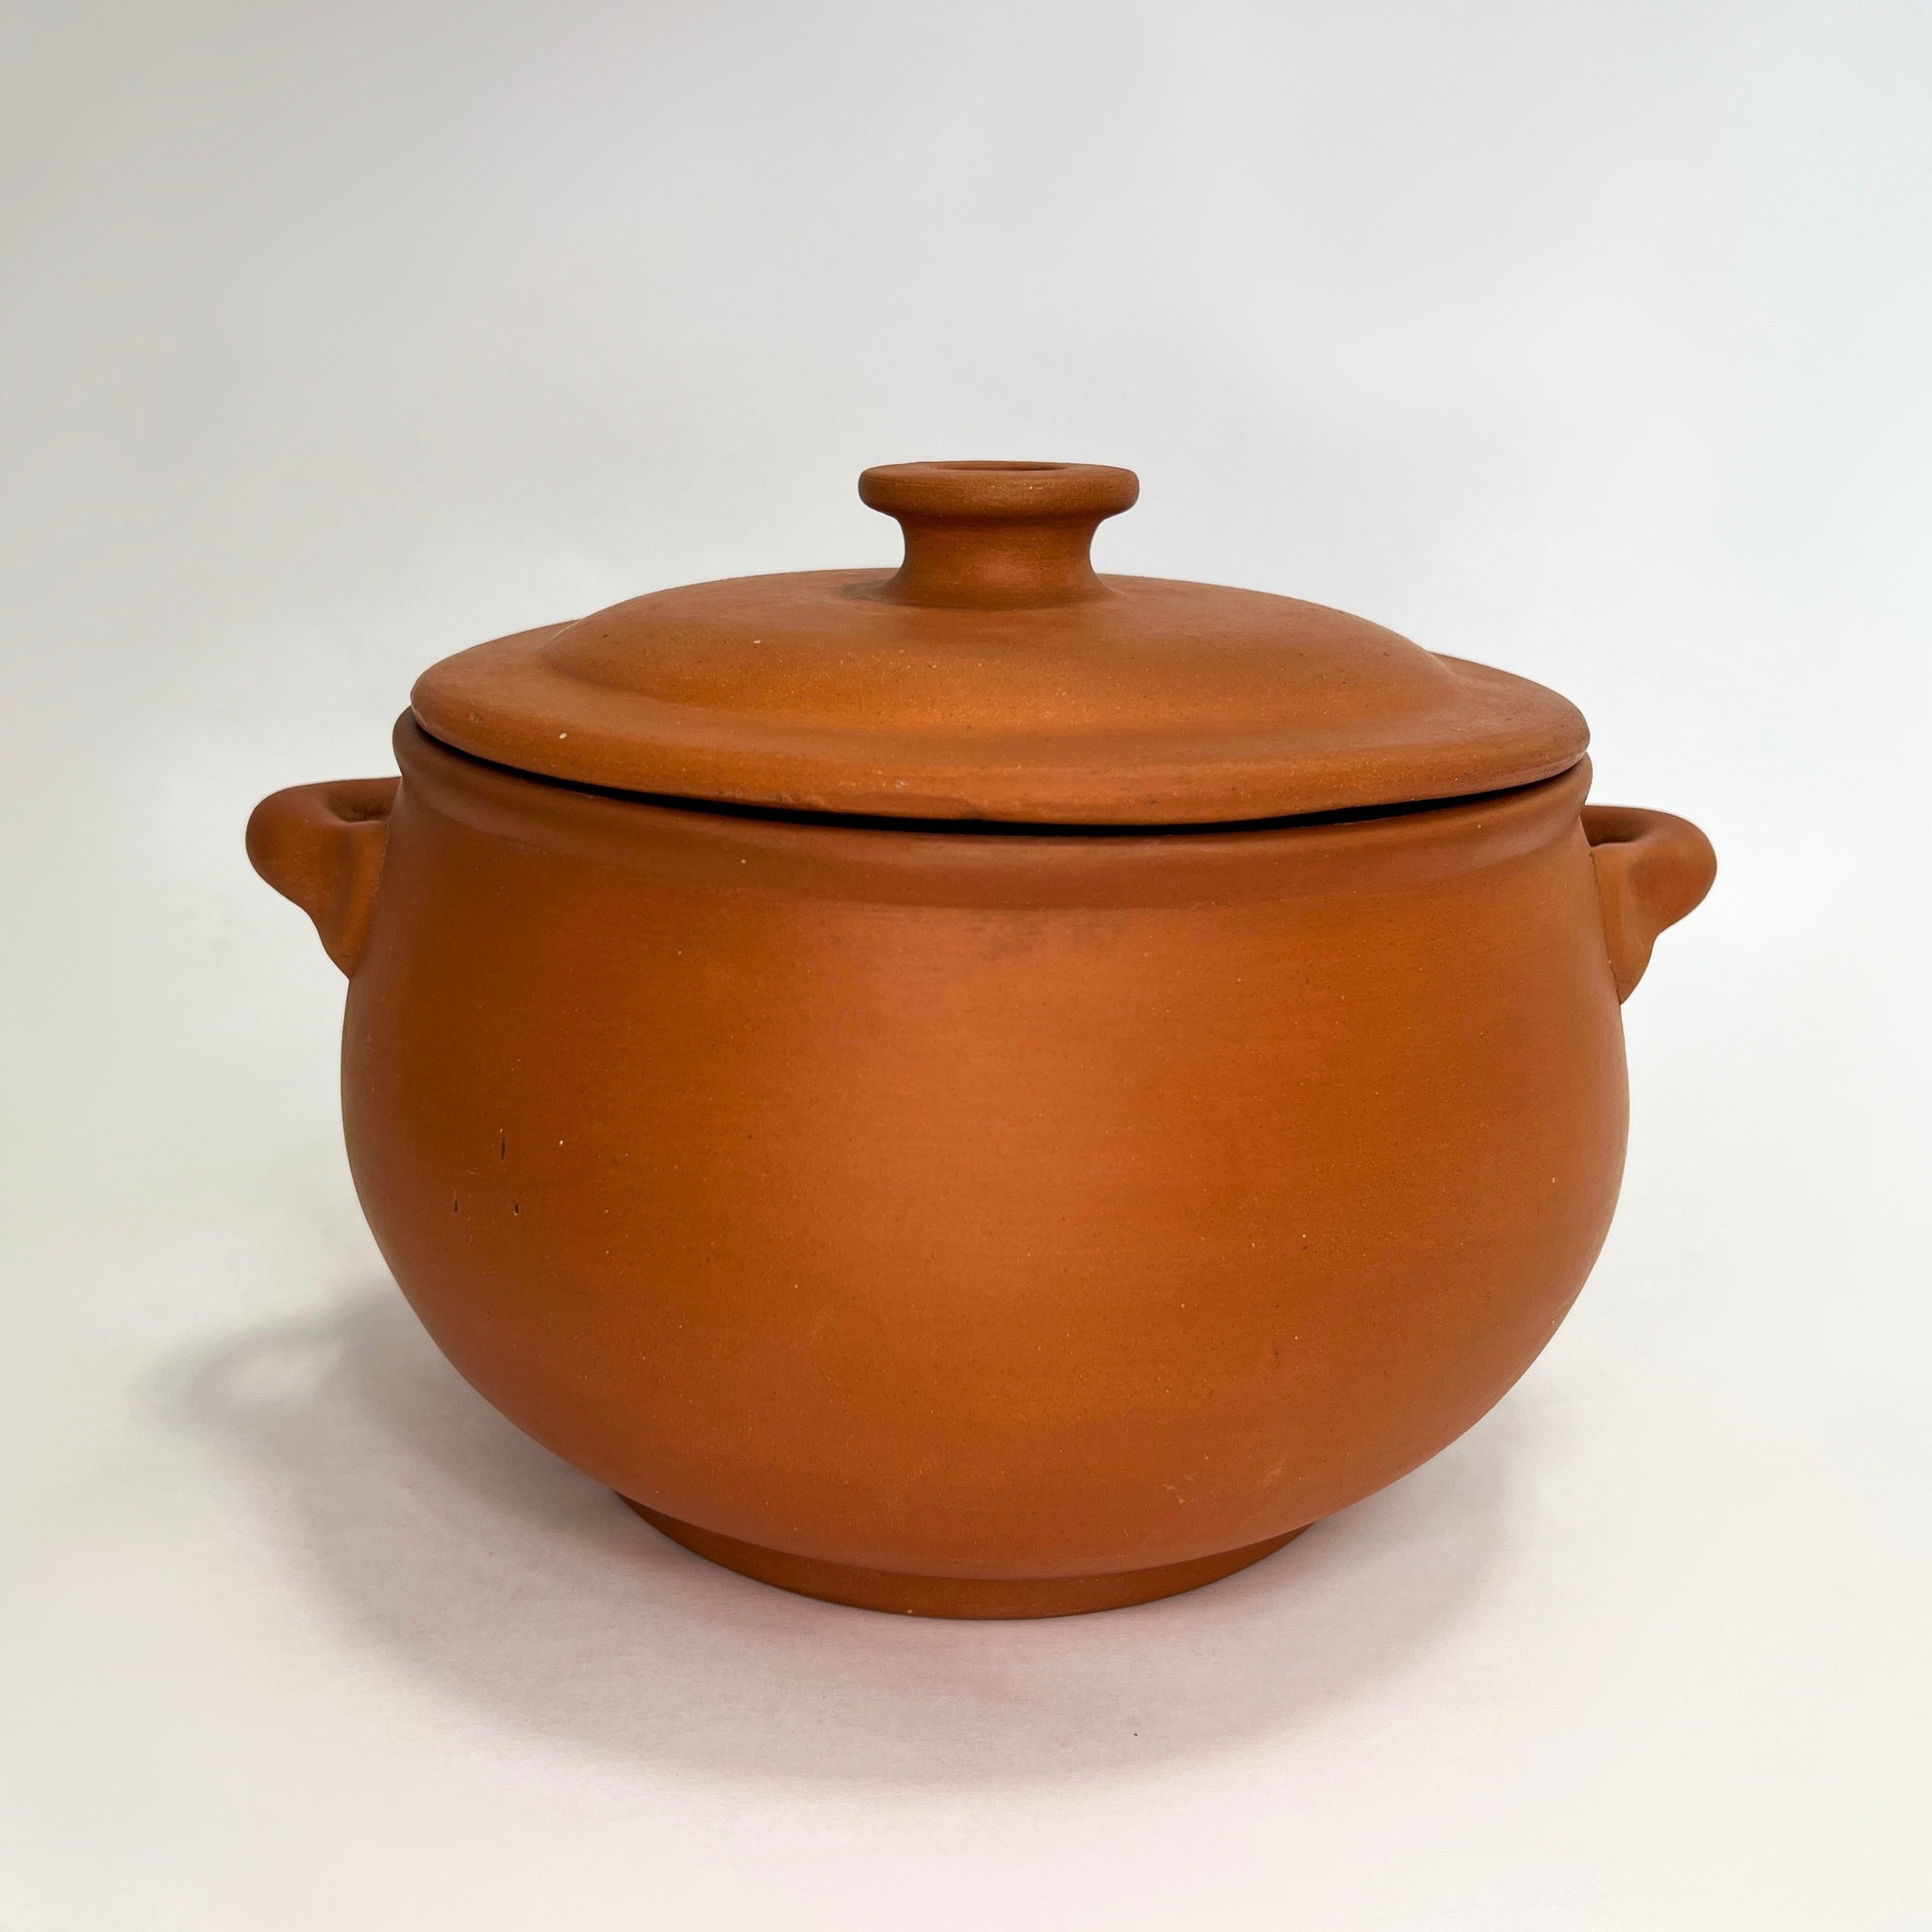 Staub 2 quart Stewpot is the Perfect size pot to prepare your meals